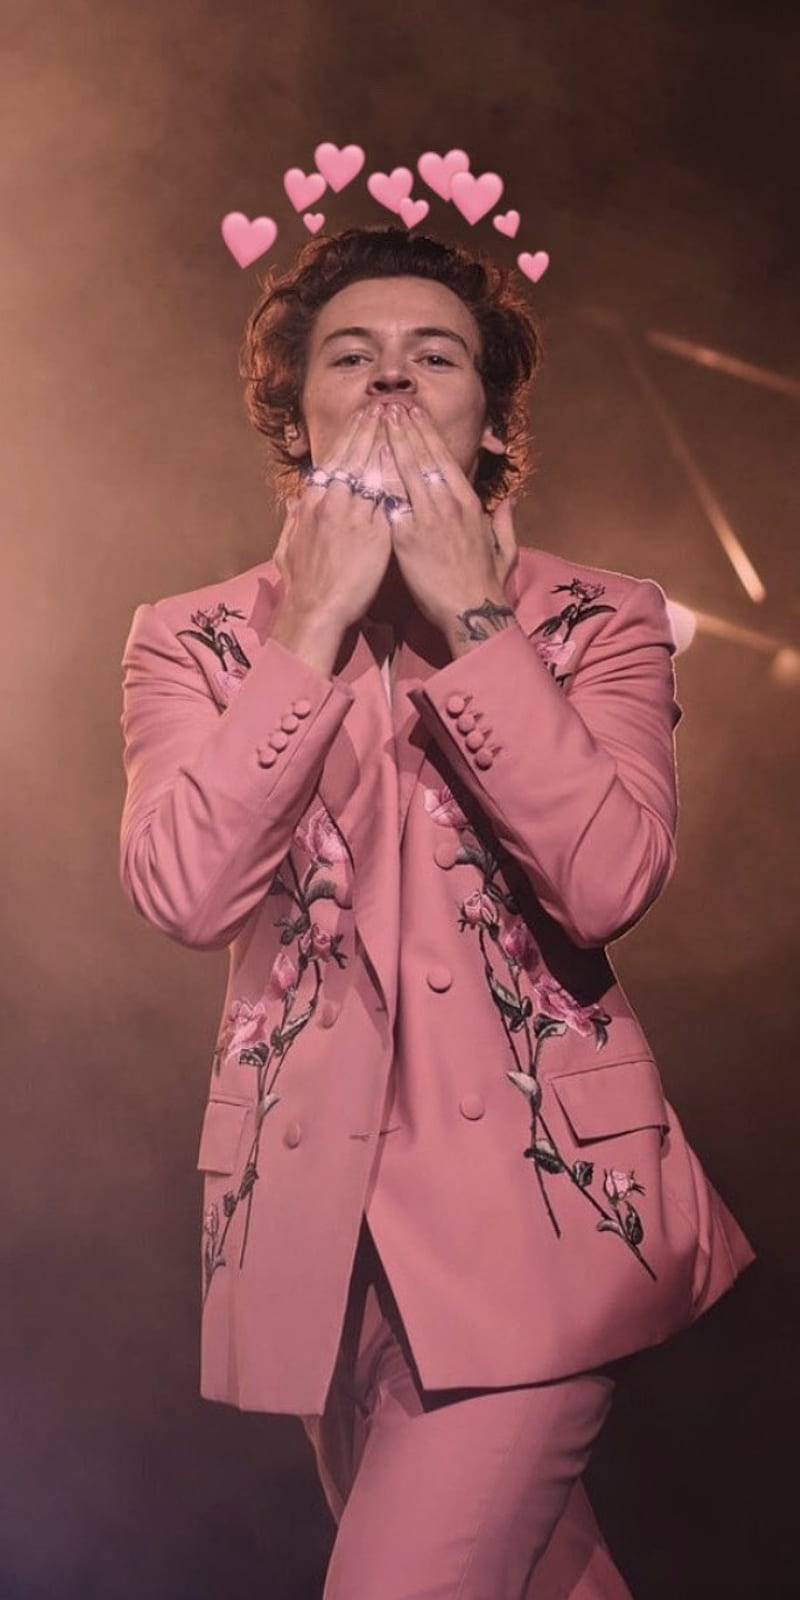 Harry styles doing the whale but make it pink  Harry styles poster Harry  styles wallpaper Harry styles pictures